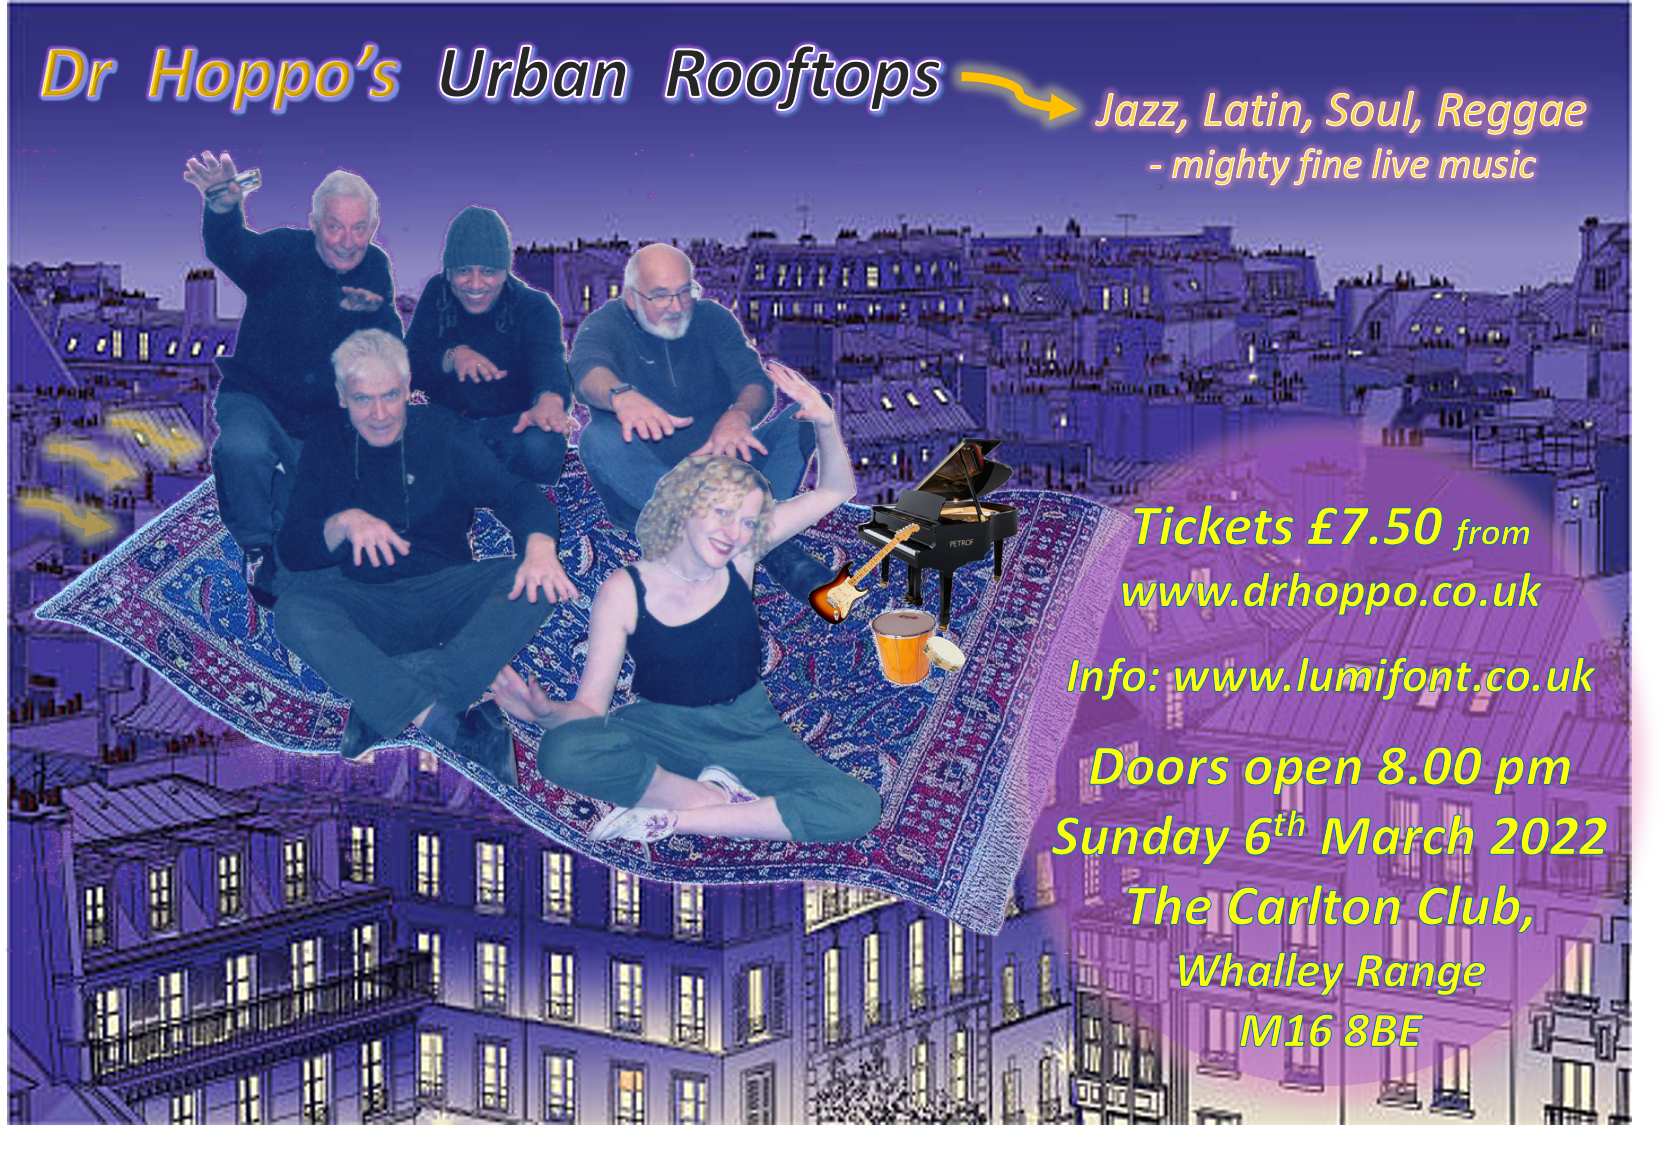 Poster for Urban Rooftops gig Friday, 17th Dec at St Catherine's